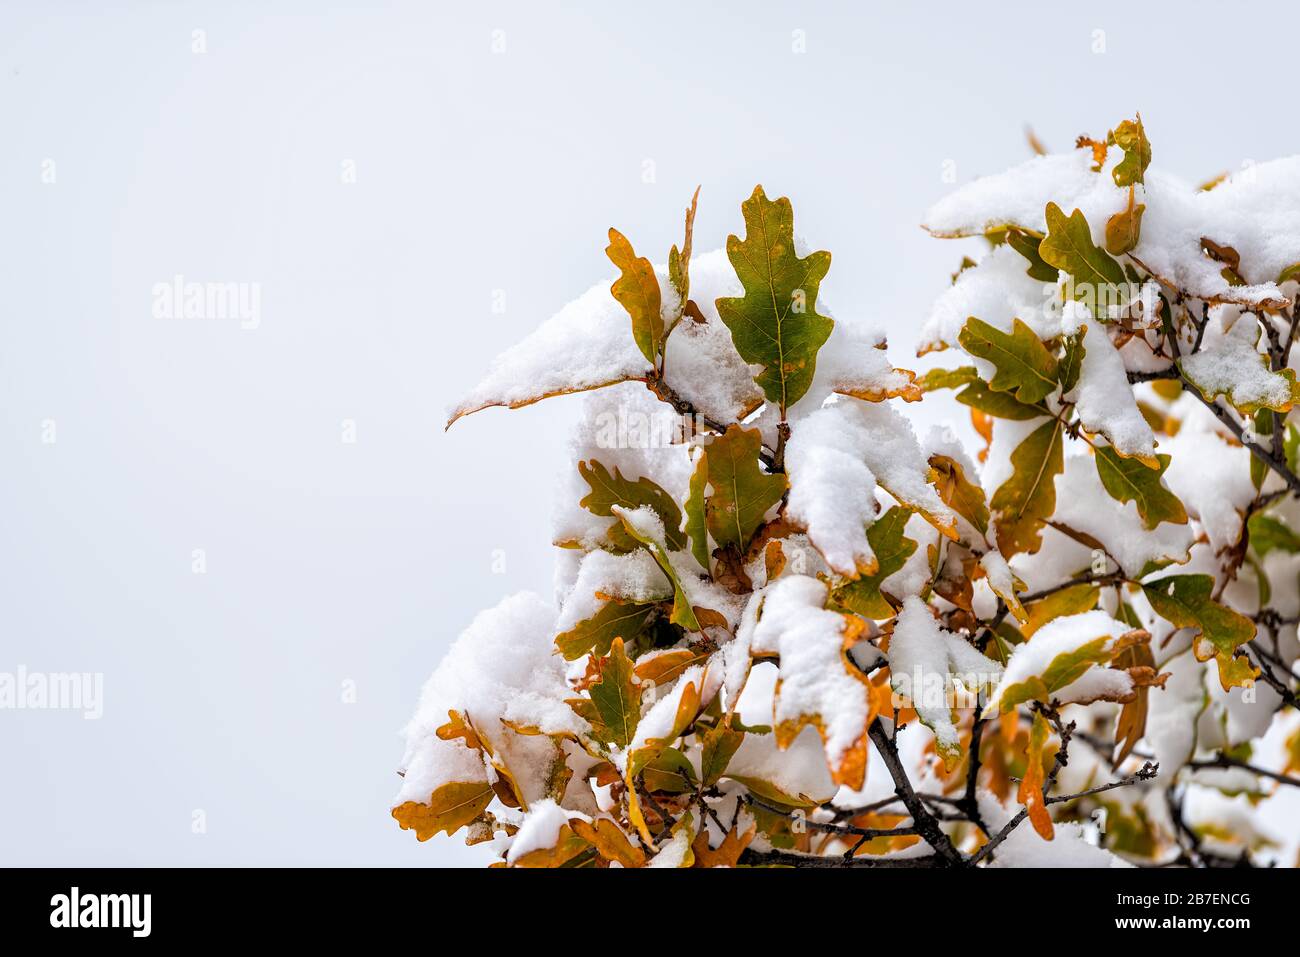 Aspen, Colorado rocky mountains and colorful of autumn foliage on oak tree leaves with snow covering closeup isolated against sky Stock Photo